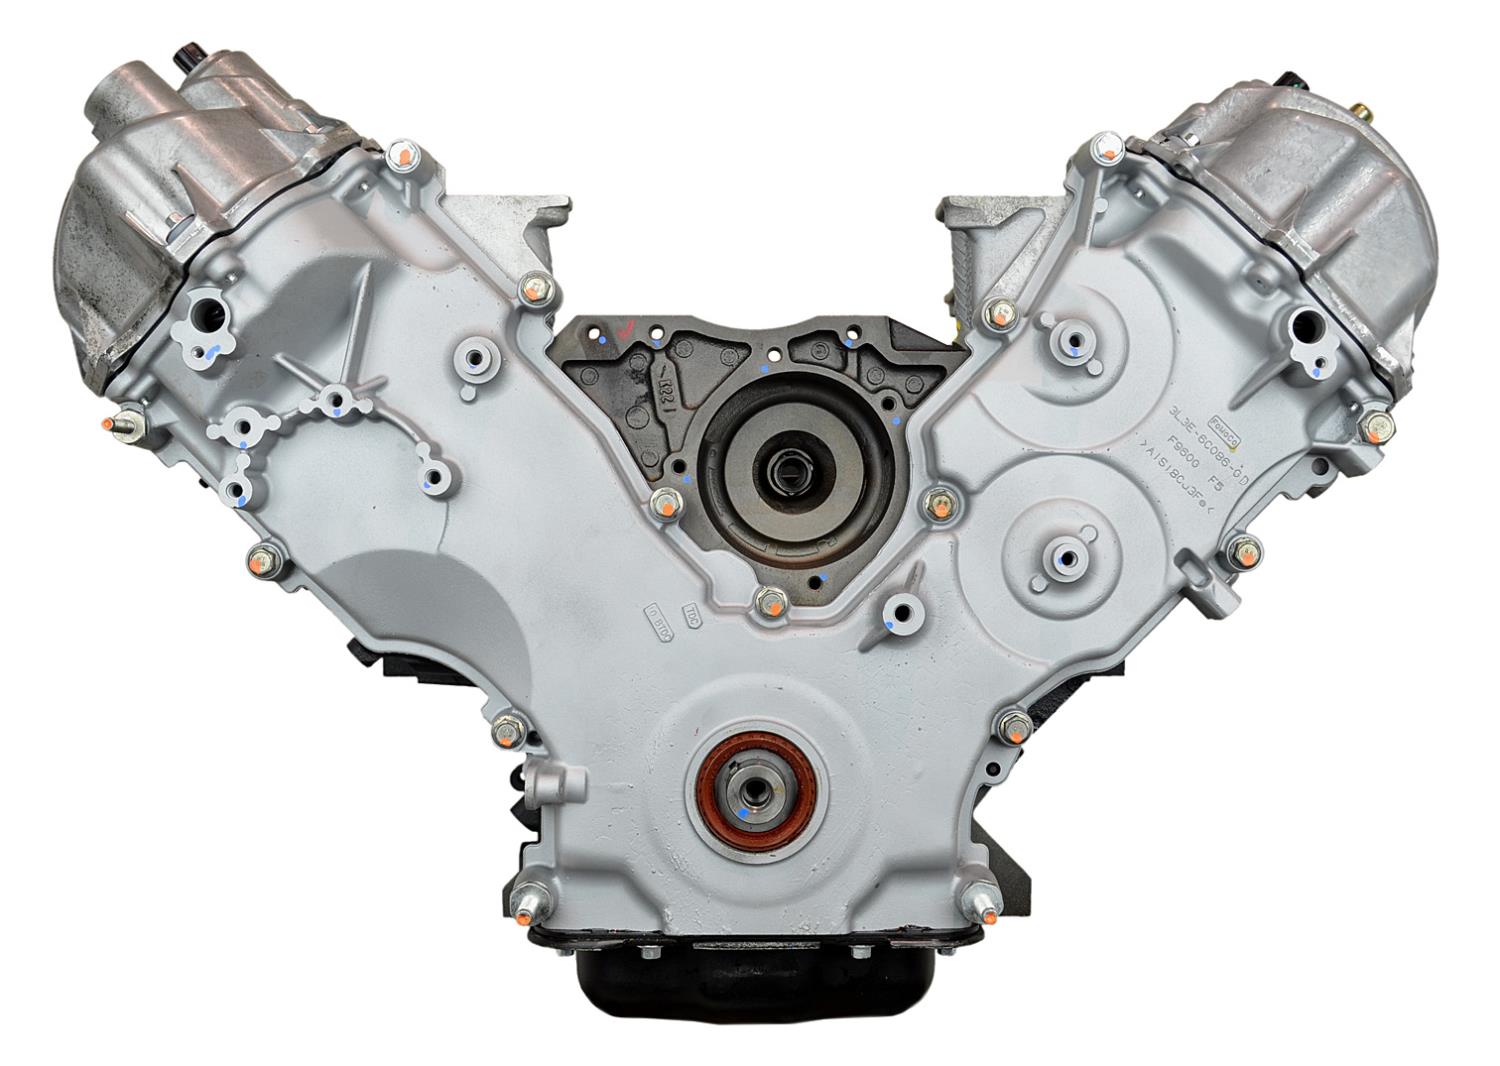 ATK Engines VFDV: Remanufactured Crate Engine for 2004-2008 Ford F-Series  Truck & Expedition with 5.4L V8 - JEGS